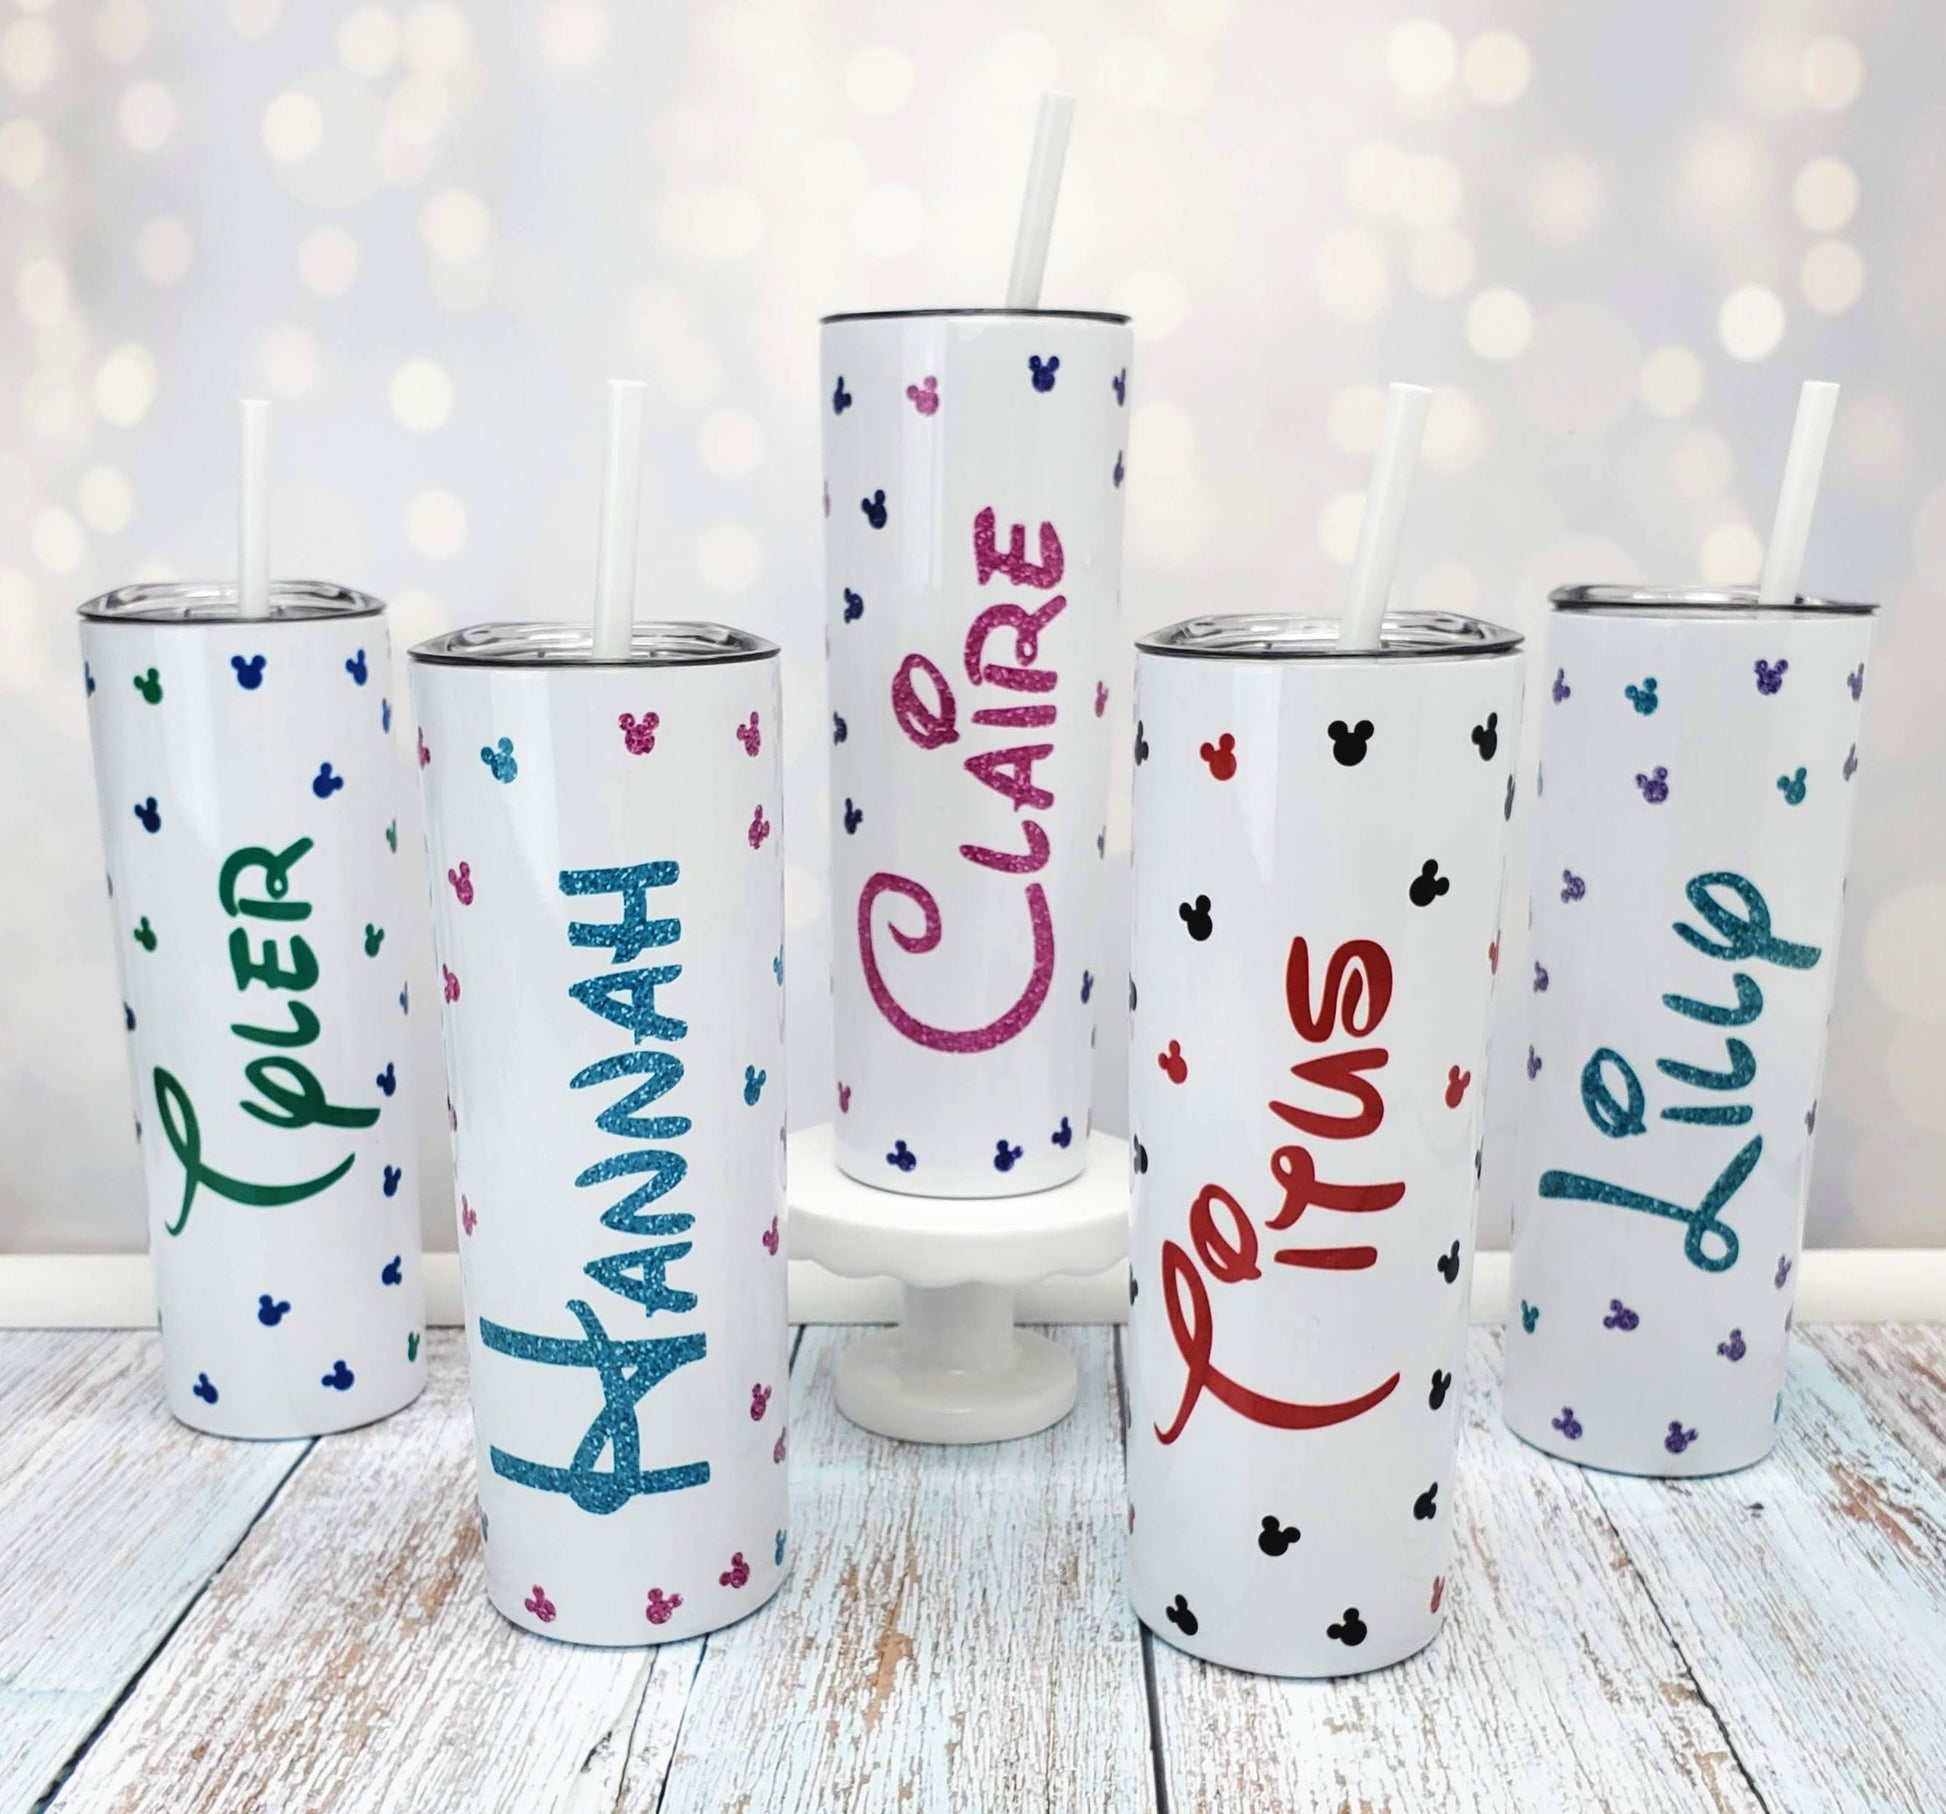 HOGG is having a 10% off site wide sale today only! Tumblers